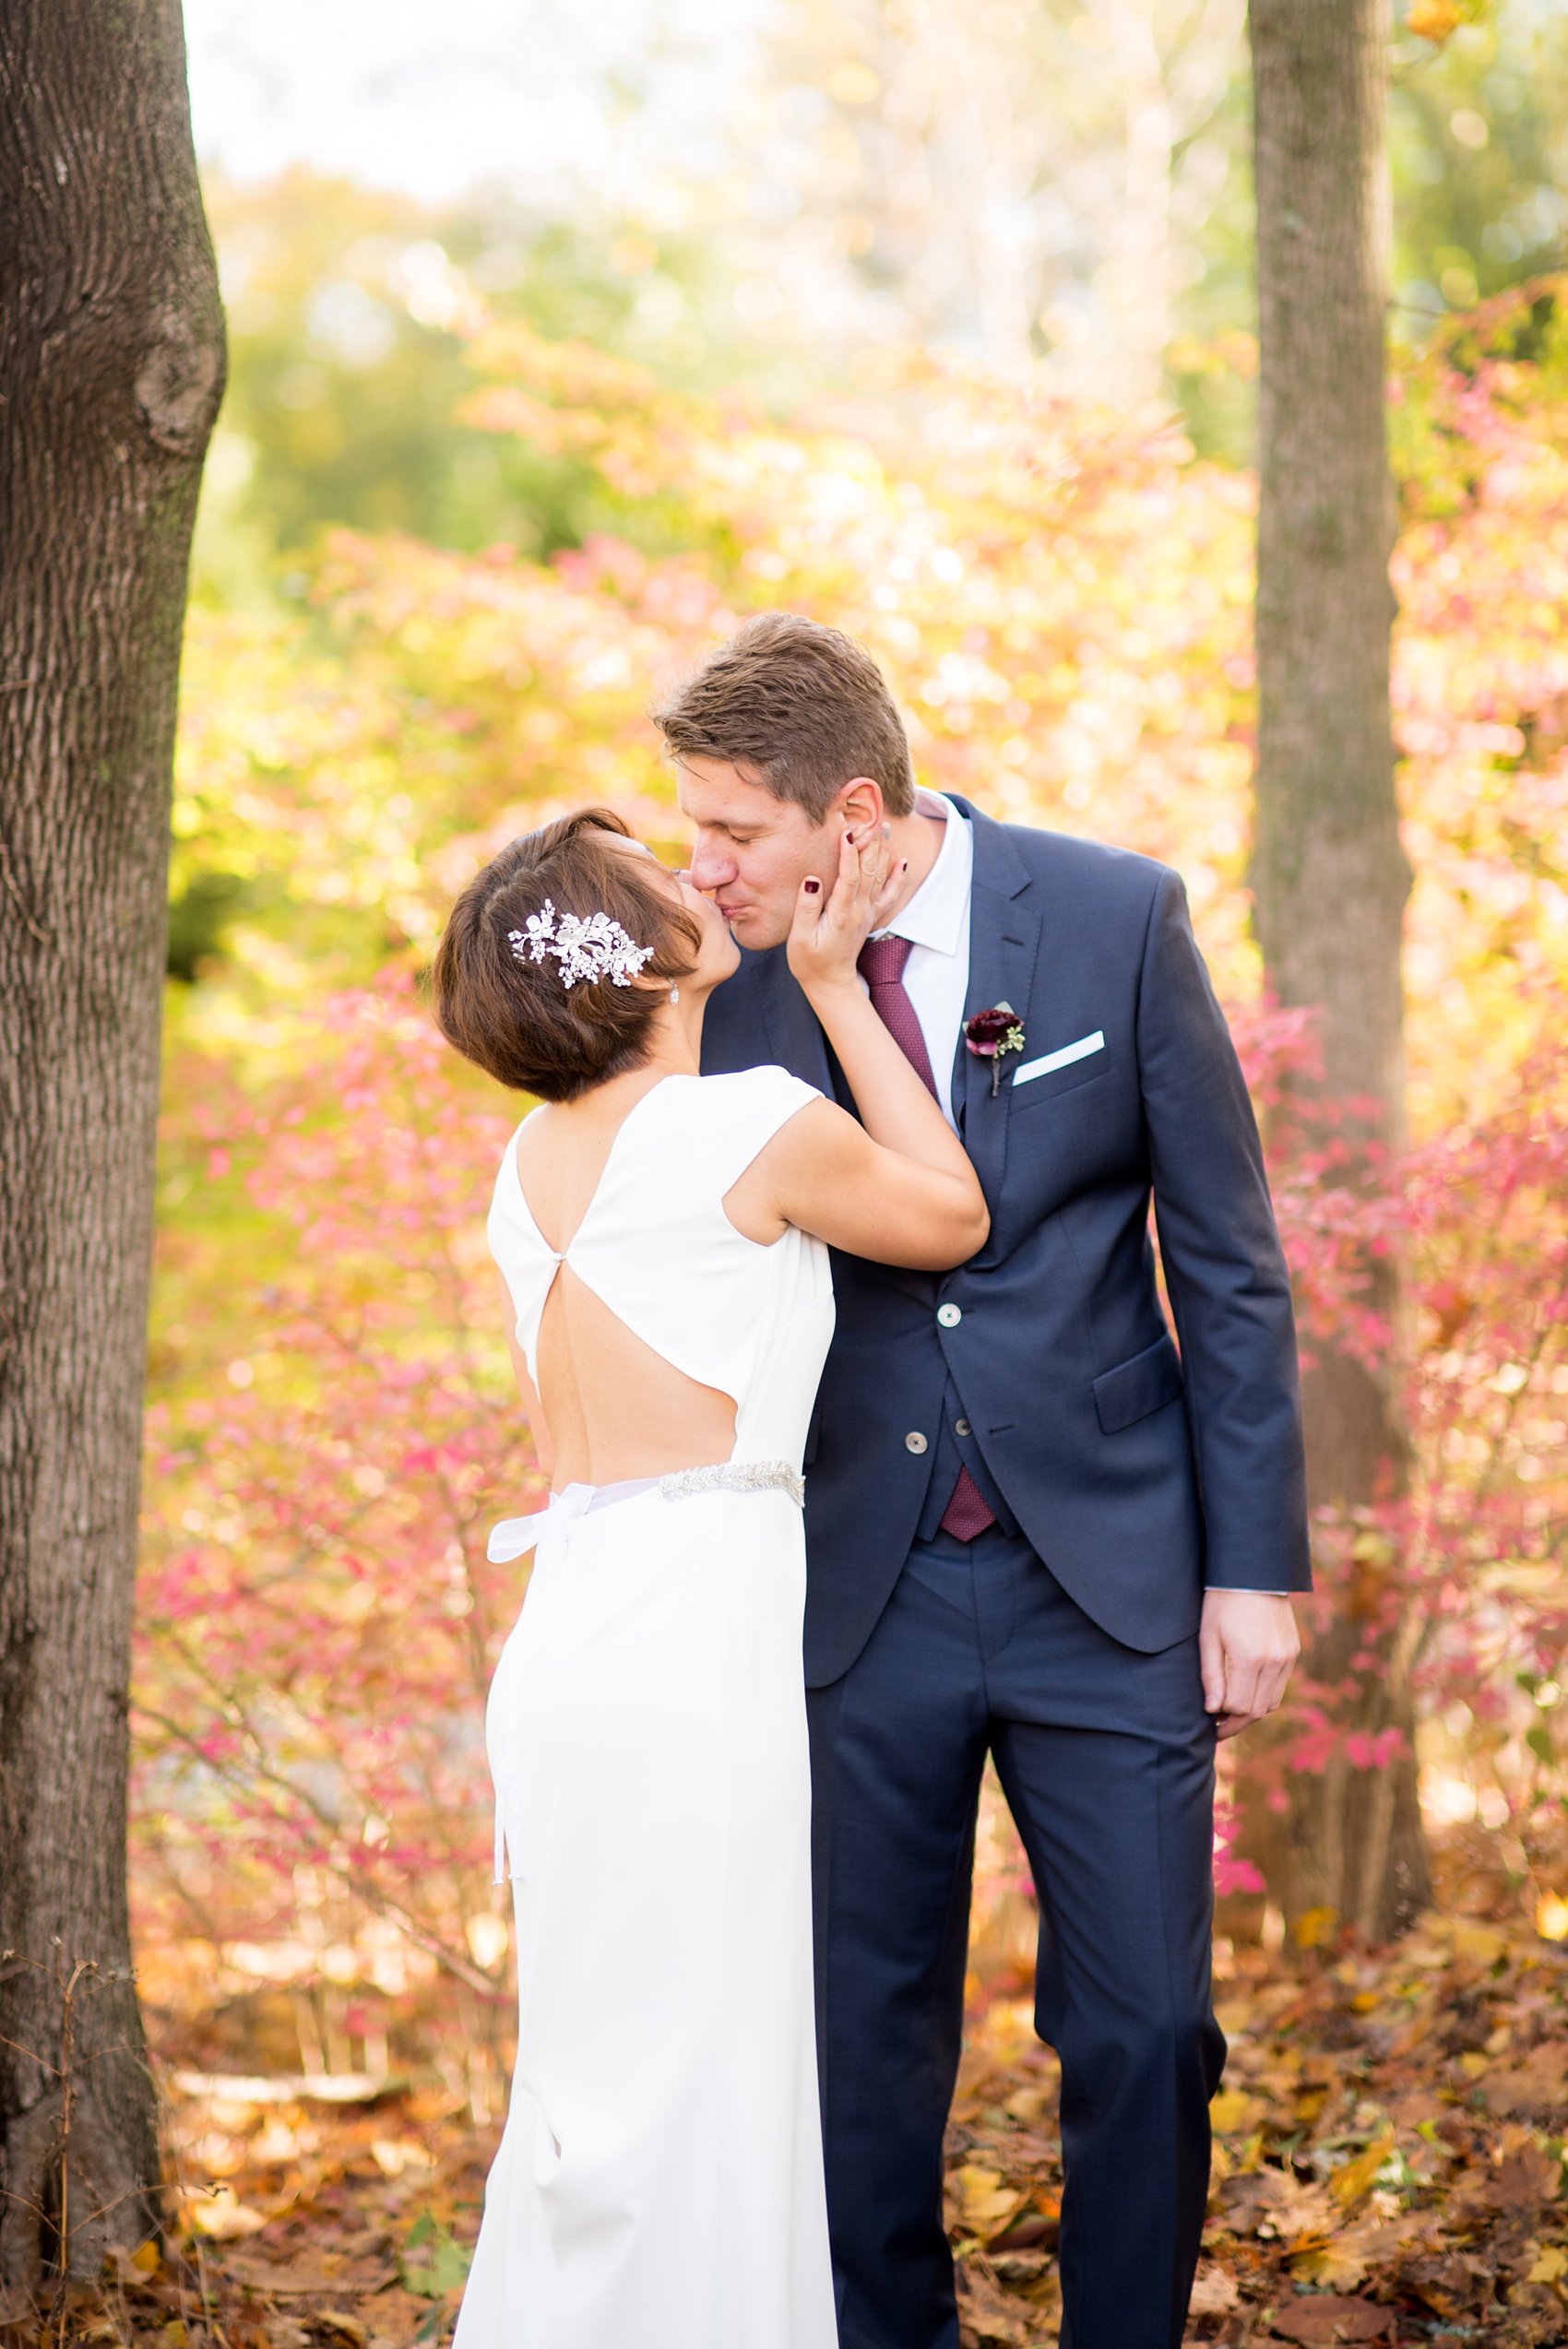 Mikkel Paige Photography photos of a wedding at Crabtree's Kittle House in Chappaqua, New York. Photo of the bride and groom with autumn leaves.